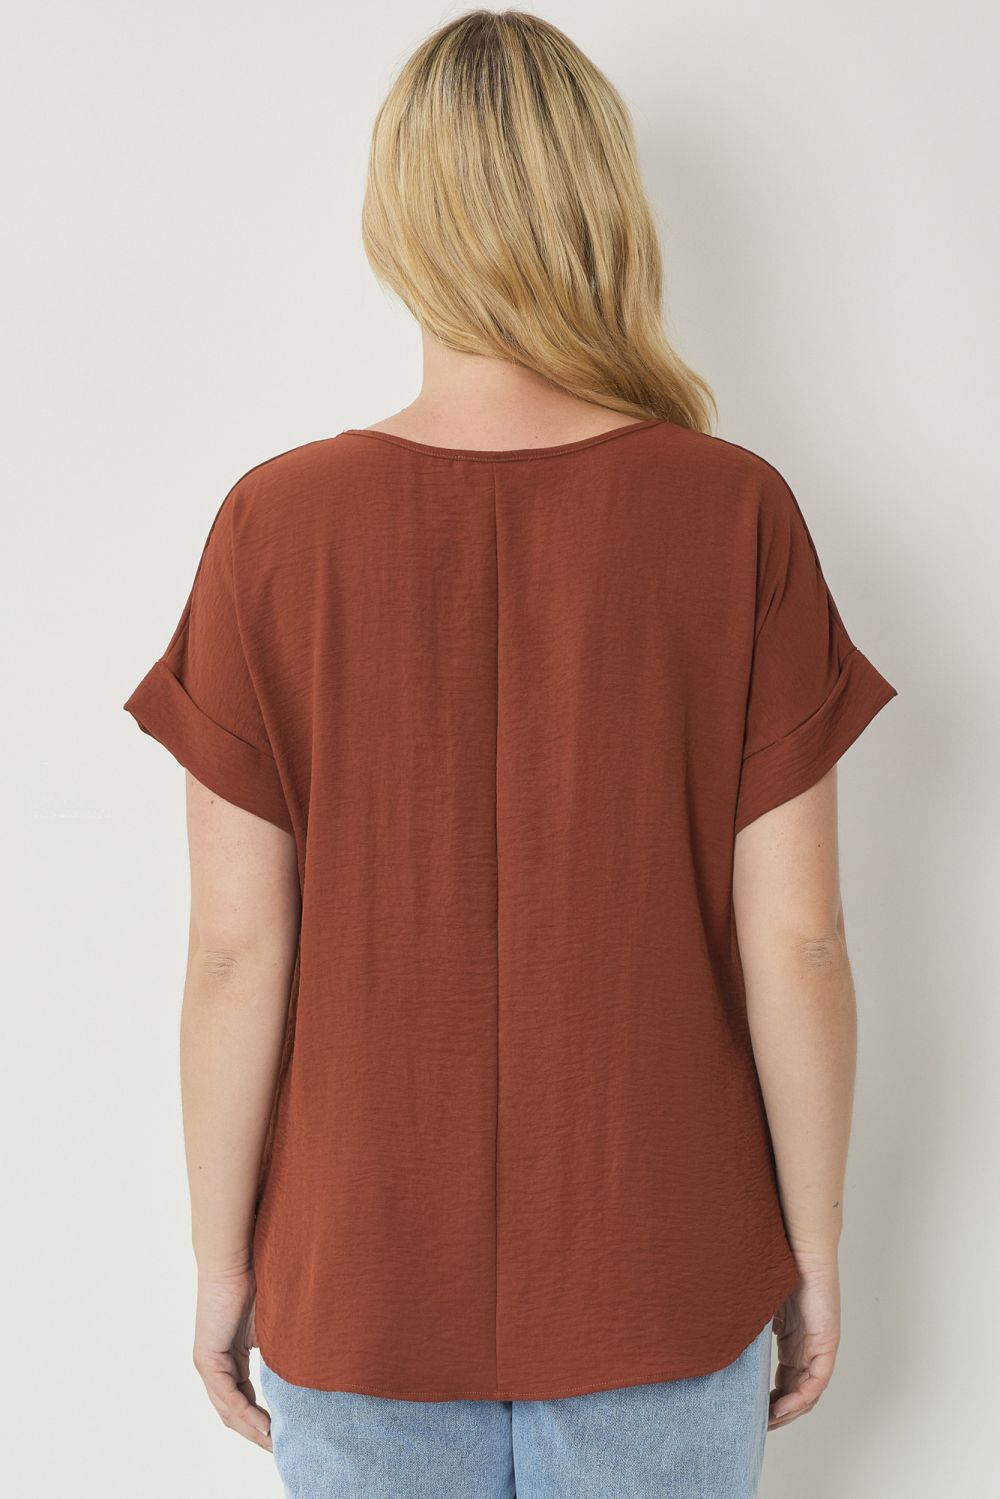 Entro® Scoop-Neck Top With Rolled Sleeve Detail Available in Small to 2XL